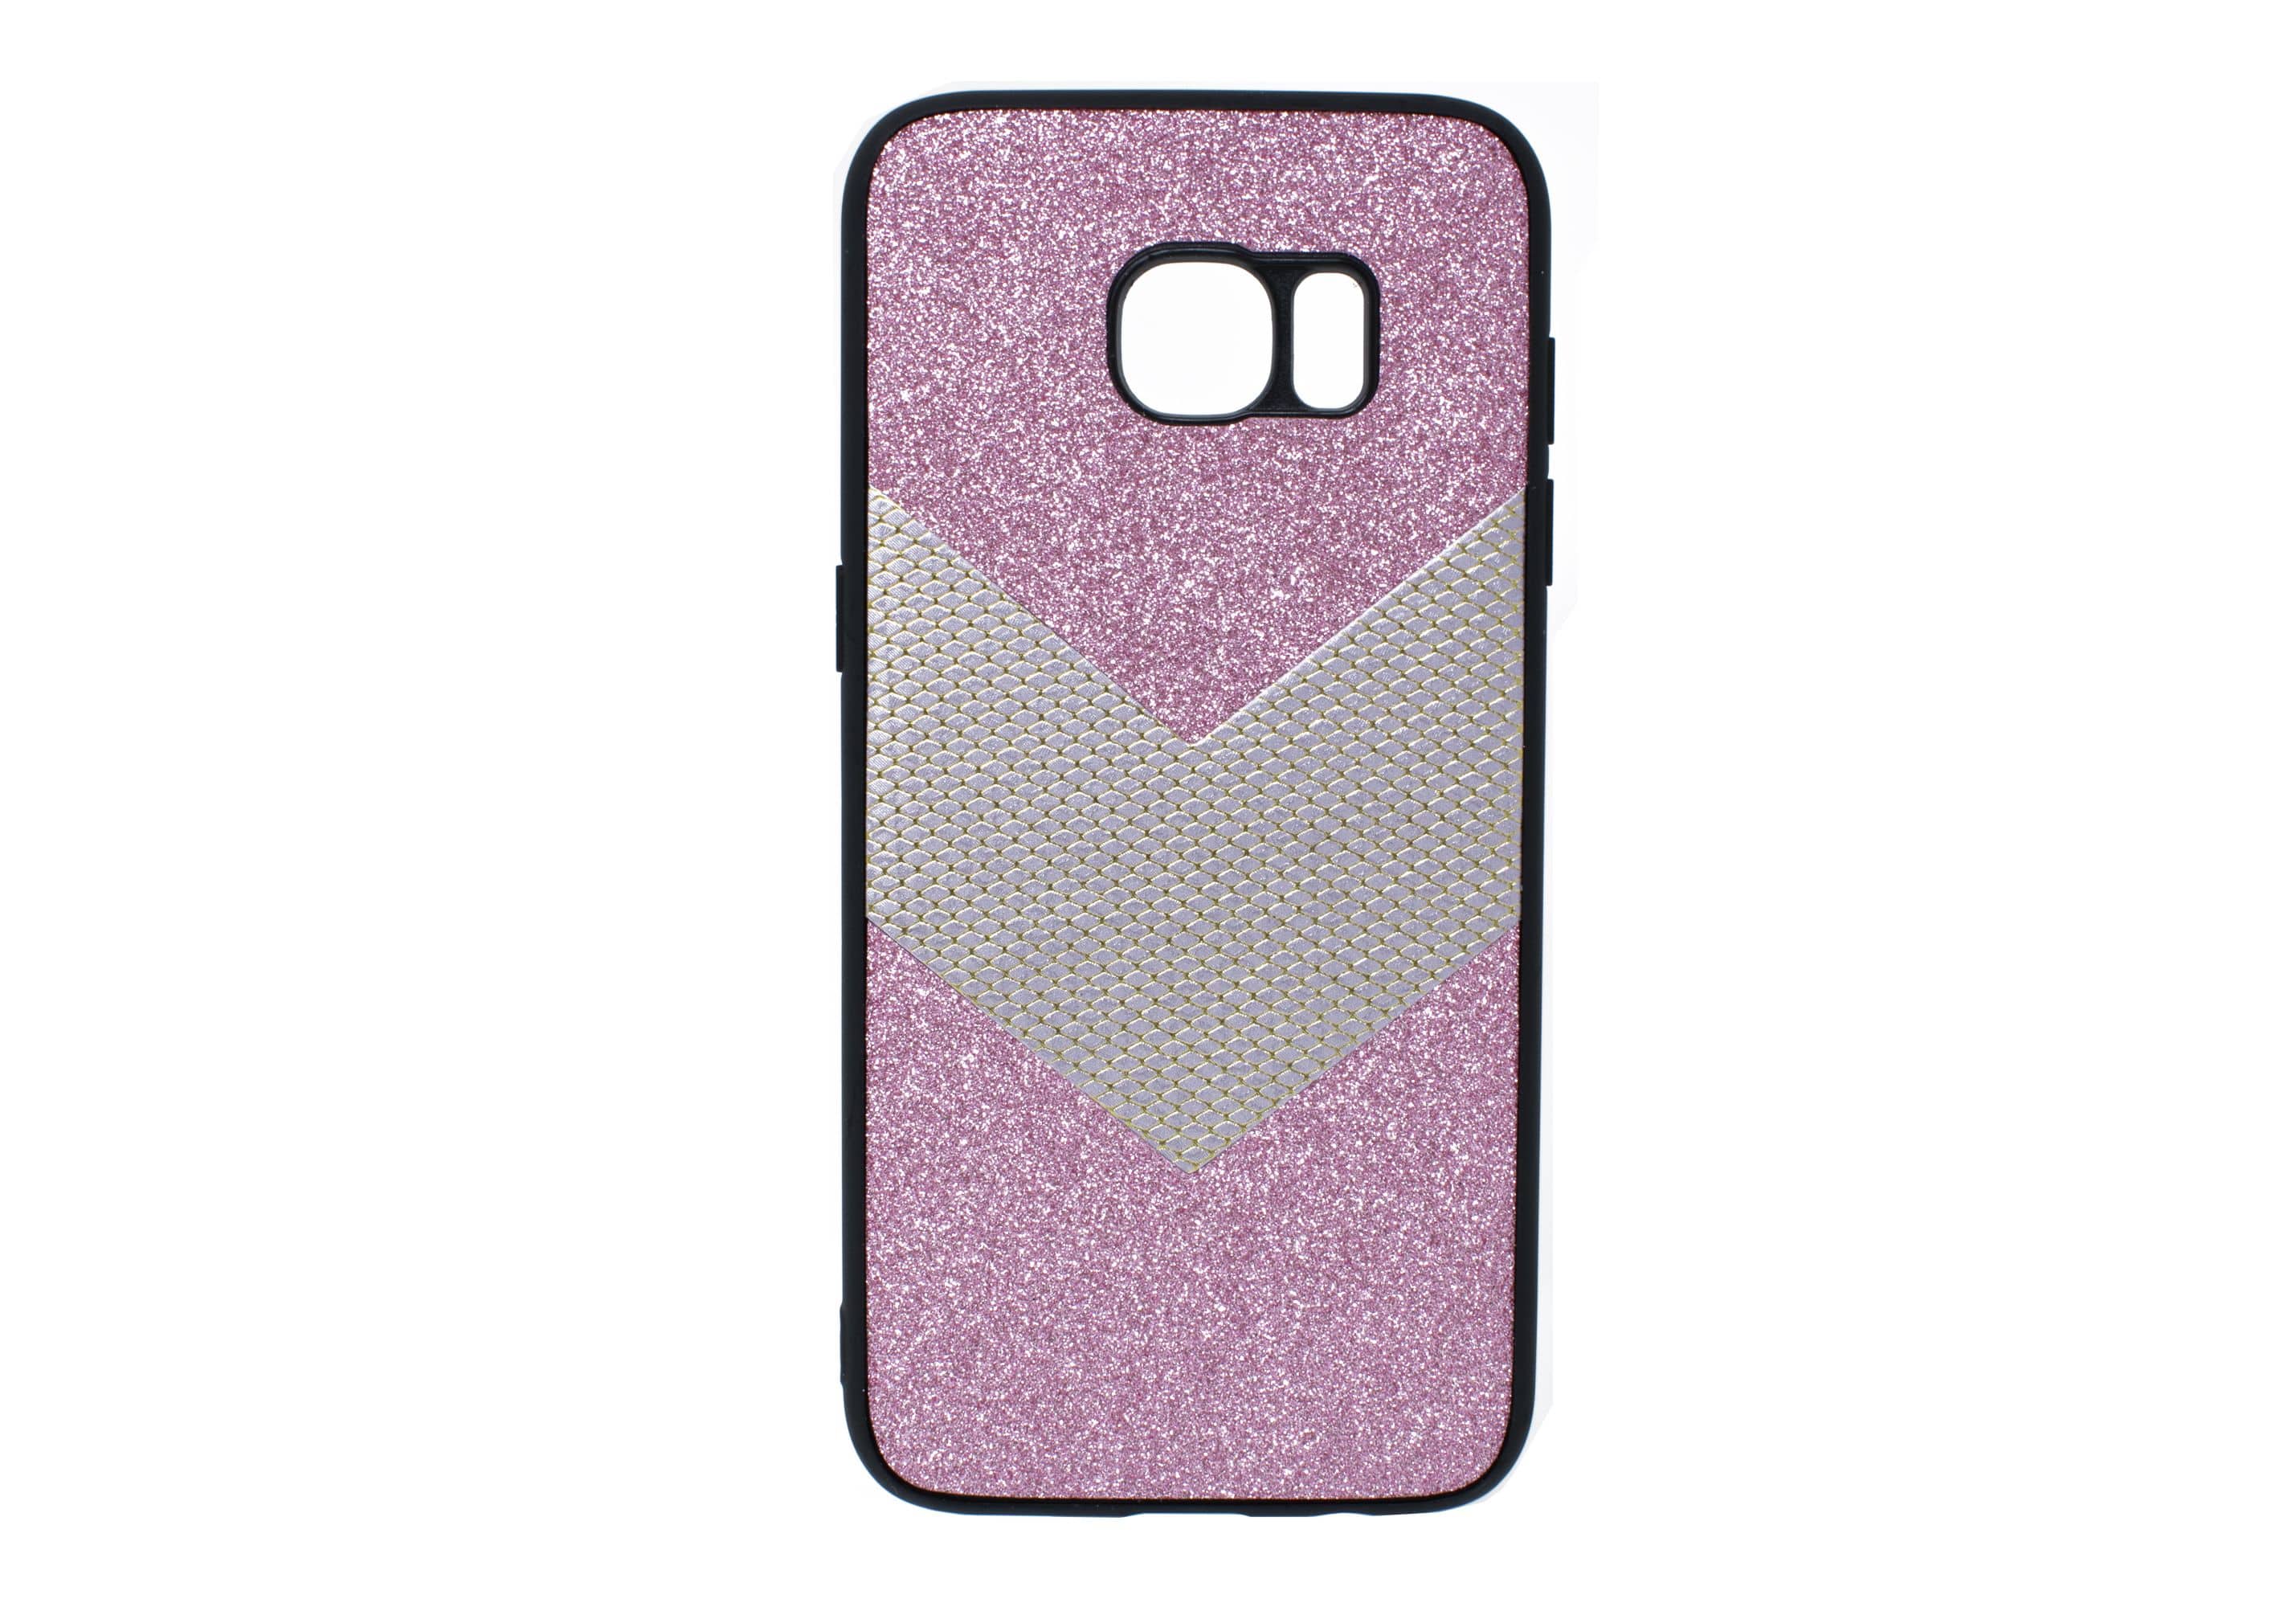 Samsung Galaxy S9 Pink Glitter with Silver Arrow Case